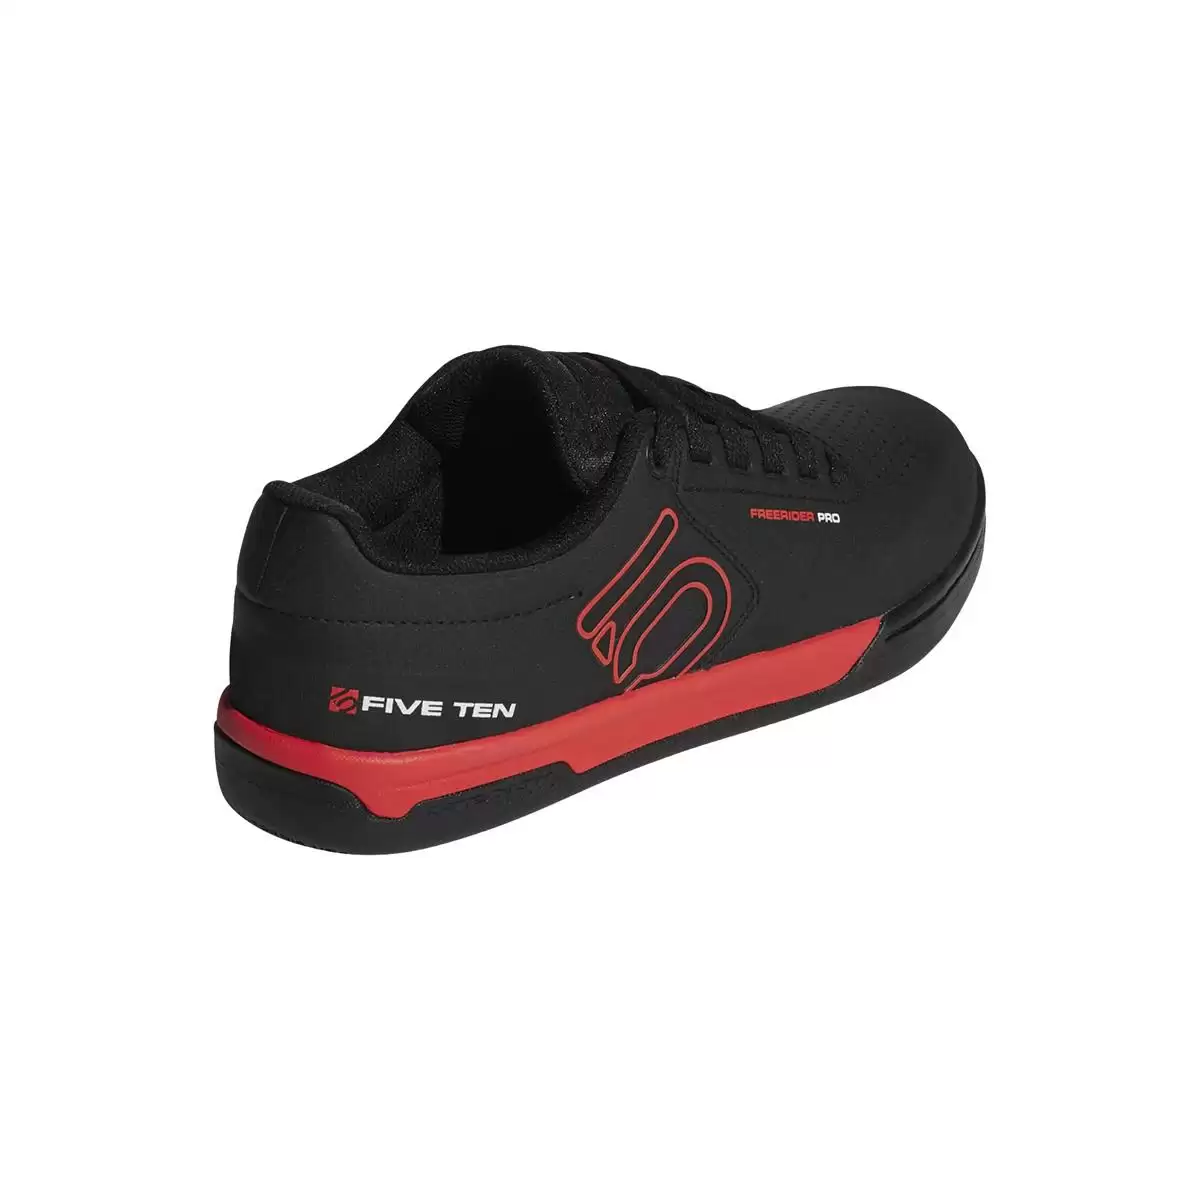 Chaussures Plates VTT Freerider Pro Noir/Rouge Taille 42,5 #2